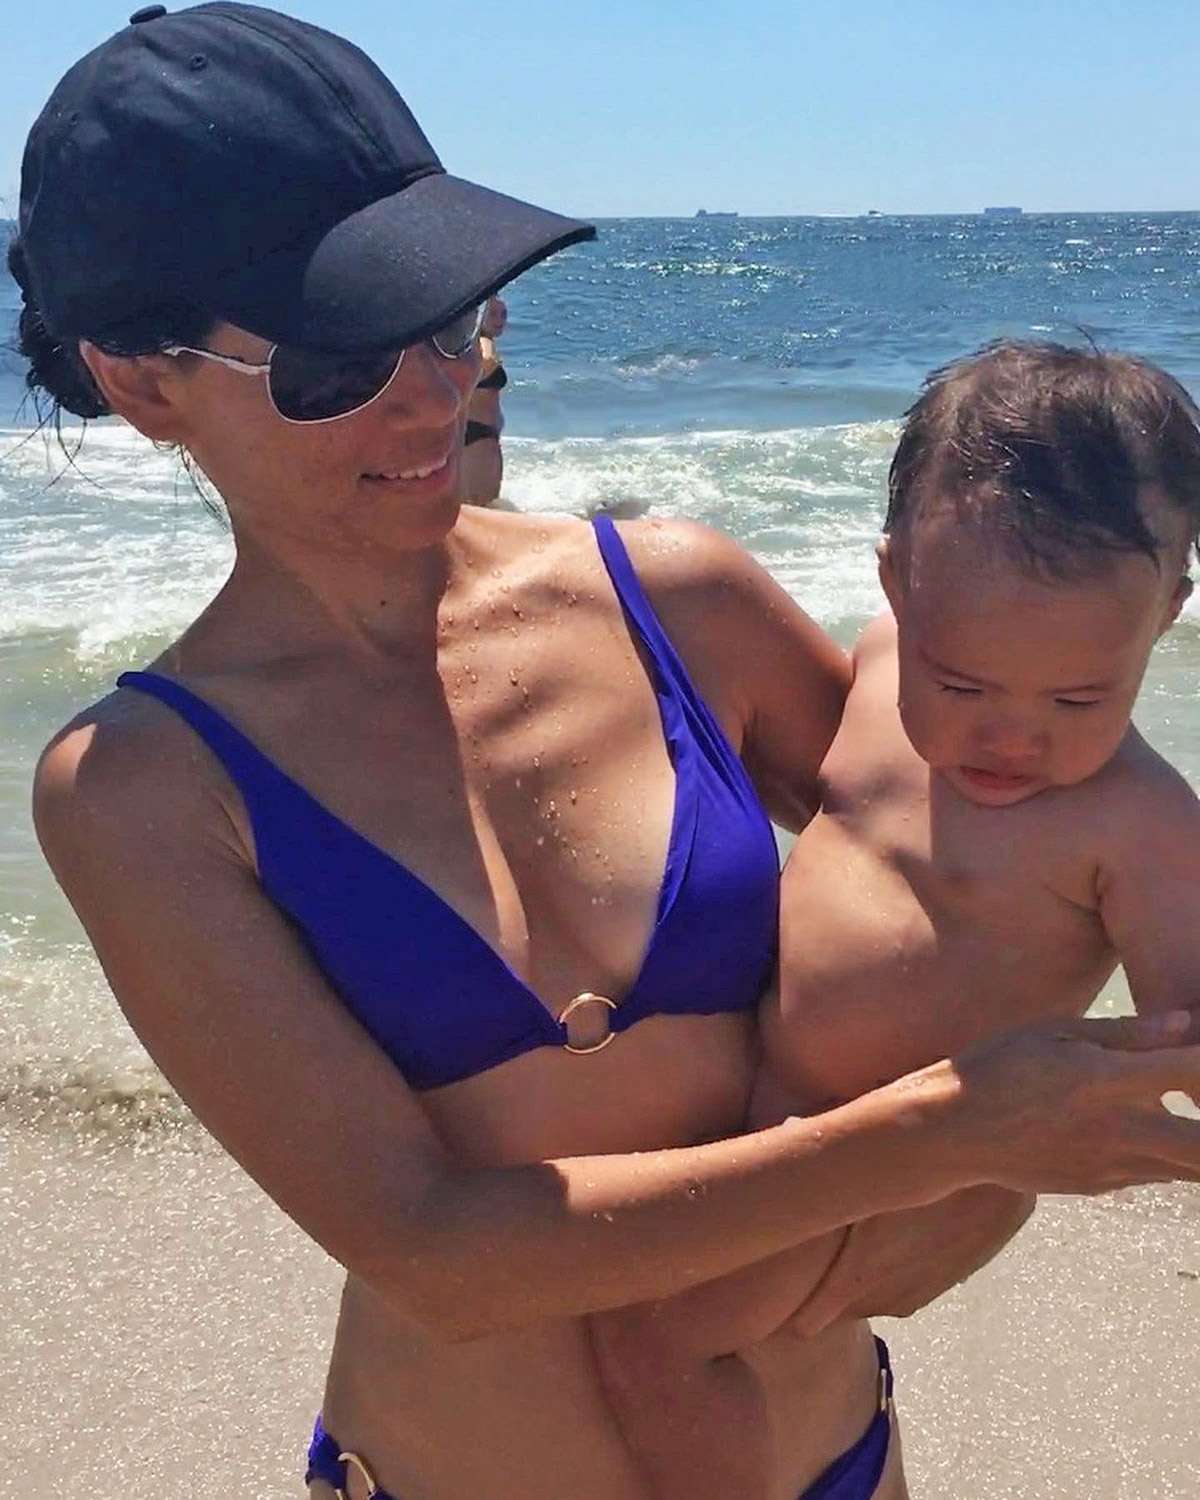 Celebrity Bikini Gallery Claudia Shiffer: https://www.instagram.com/p/CfEZIl6LlY5/ Bethenny Frankel: https://www.instagram.com/p/CepBD5Jvu9K/ Sonja Morgan: https://www.instagram.com/p/CddtioJO0Rr/ Mary J. BLige: https://www.instagram.com/p/CeJduUbL908/ Halle Berry: https://www.instagram.com/p/CZsahYNrl9f/ Christie Brinkley: https://www.instagram.com/p/CYy8iSiOtpv/?hl=en Kelly Bensimon: https://www.gettyimages.com/detail/news-photo/kelly-bensimon-is-seen-on-the-beach-on-june-5 -2022-in-miami-news-photo/1241177454?adppopup=true Jennifer Lopez https://www.instagram.com/p/CeO2Xq6FF2C/?utm_source=ig_embed&ig_rid=6703b0e1-8bd4- 41d8-8db6-9b98bf6d170f Lucy Liu: https://www.instagram.com/p/CdRumLLutnv/?utm_source=ig_embed&ig_rid=2150d02b-df25-43 c2-8a9f-822d2fe170c9 (technically not a bikini but I think we have a one-piece somewhere in there!) Cynthia Bailey: https://www.instagram.com/p/CcbxDH9pBQm/ Elizabeth Hurley: https://www.instagram.com/p/CcOJ7GmokJo/ and https://www.instagram.com/p/CZC3t3jo0Rt/ Lisa Rinna: https://www.instagram.com/p/CTaJhjppUne/?utm_source=ig_embed&ig_rid=093479ea-65fb-48c a-99dd-cbc6586b7387